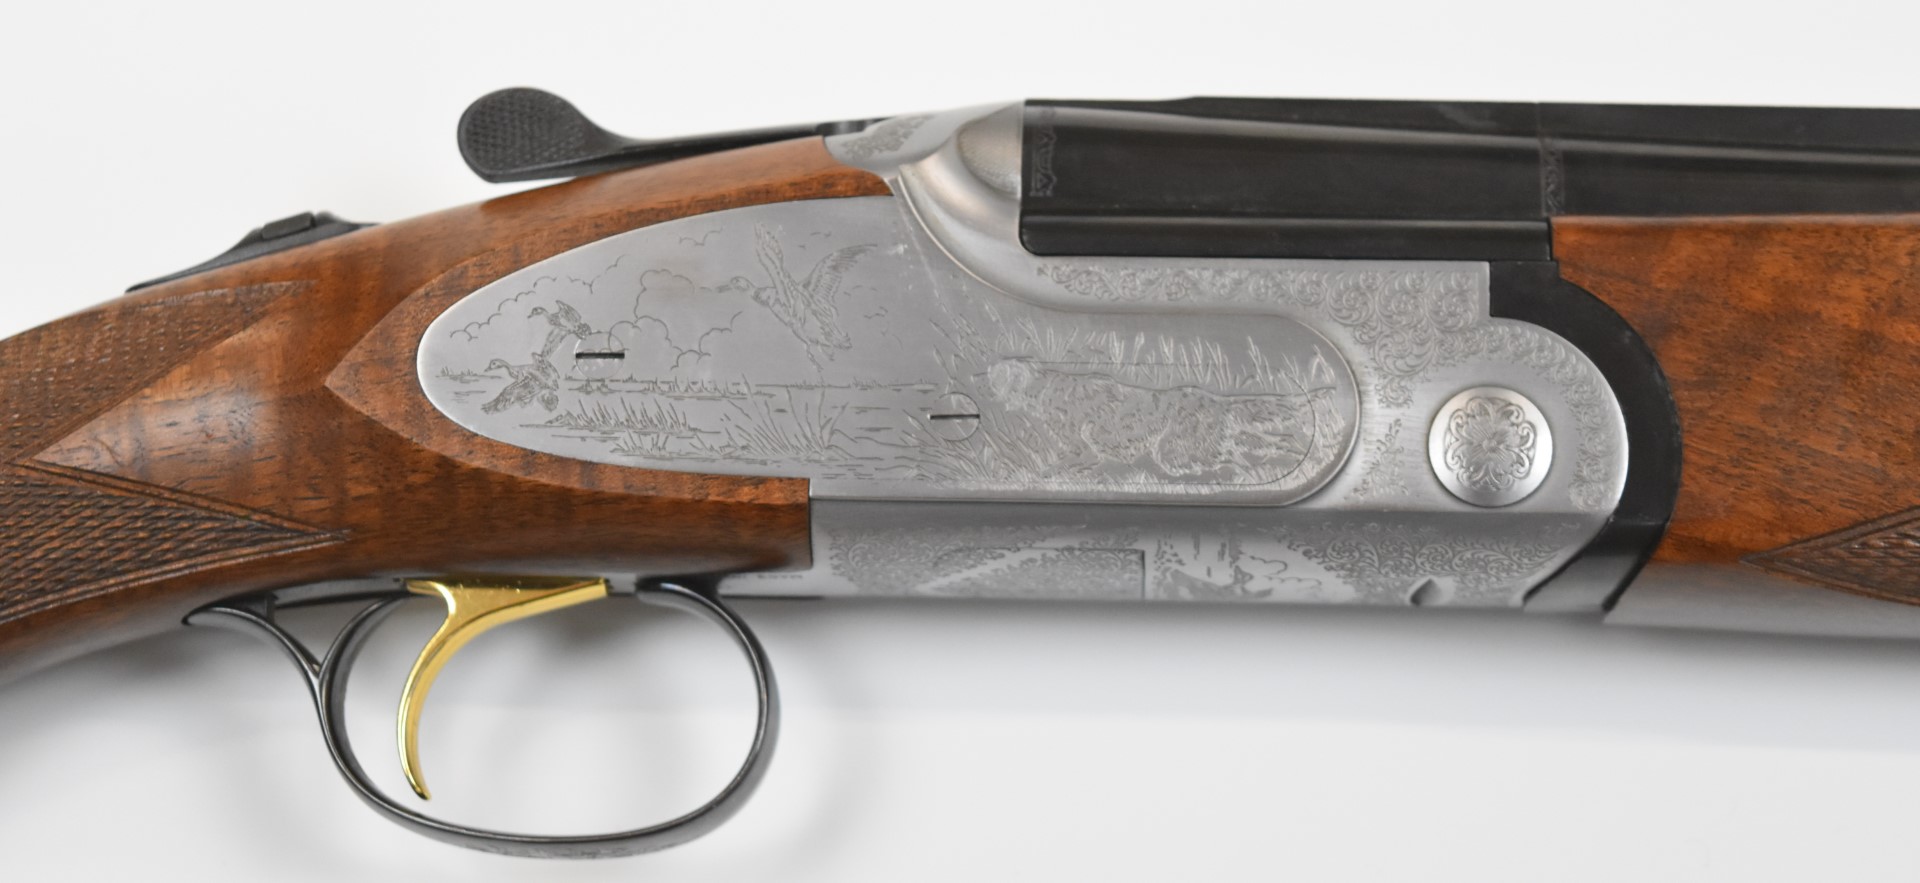 Sabatti 12 bore over under ejector shotgun with engraved scenes of birds to the sidelock plates - Image 6 of 12